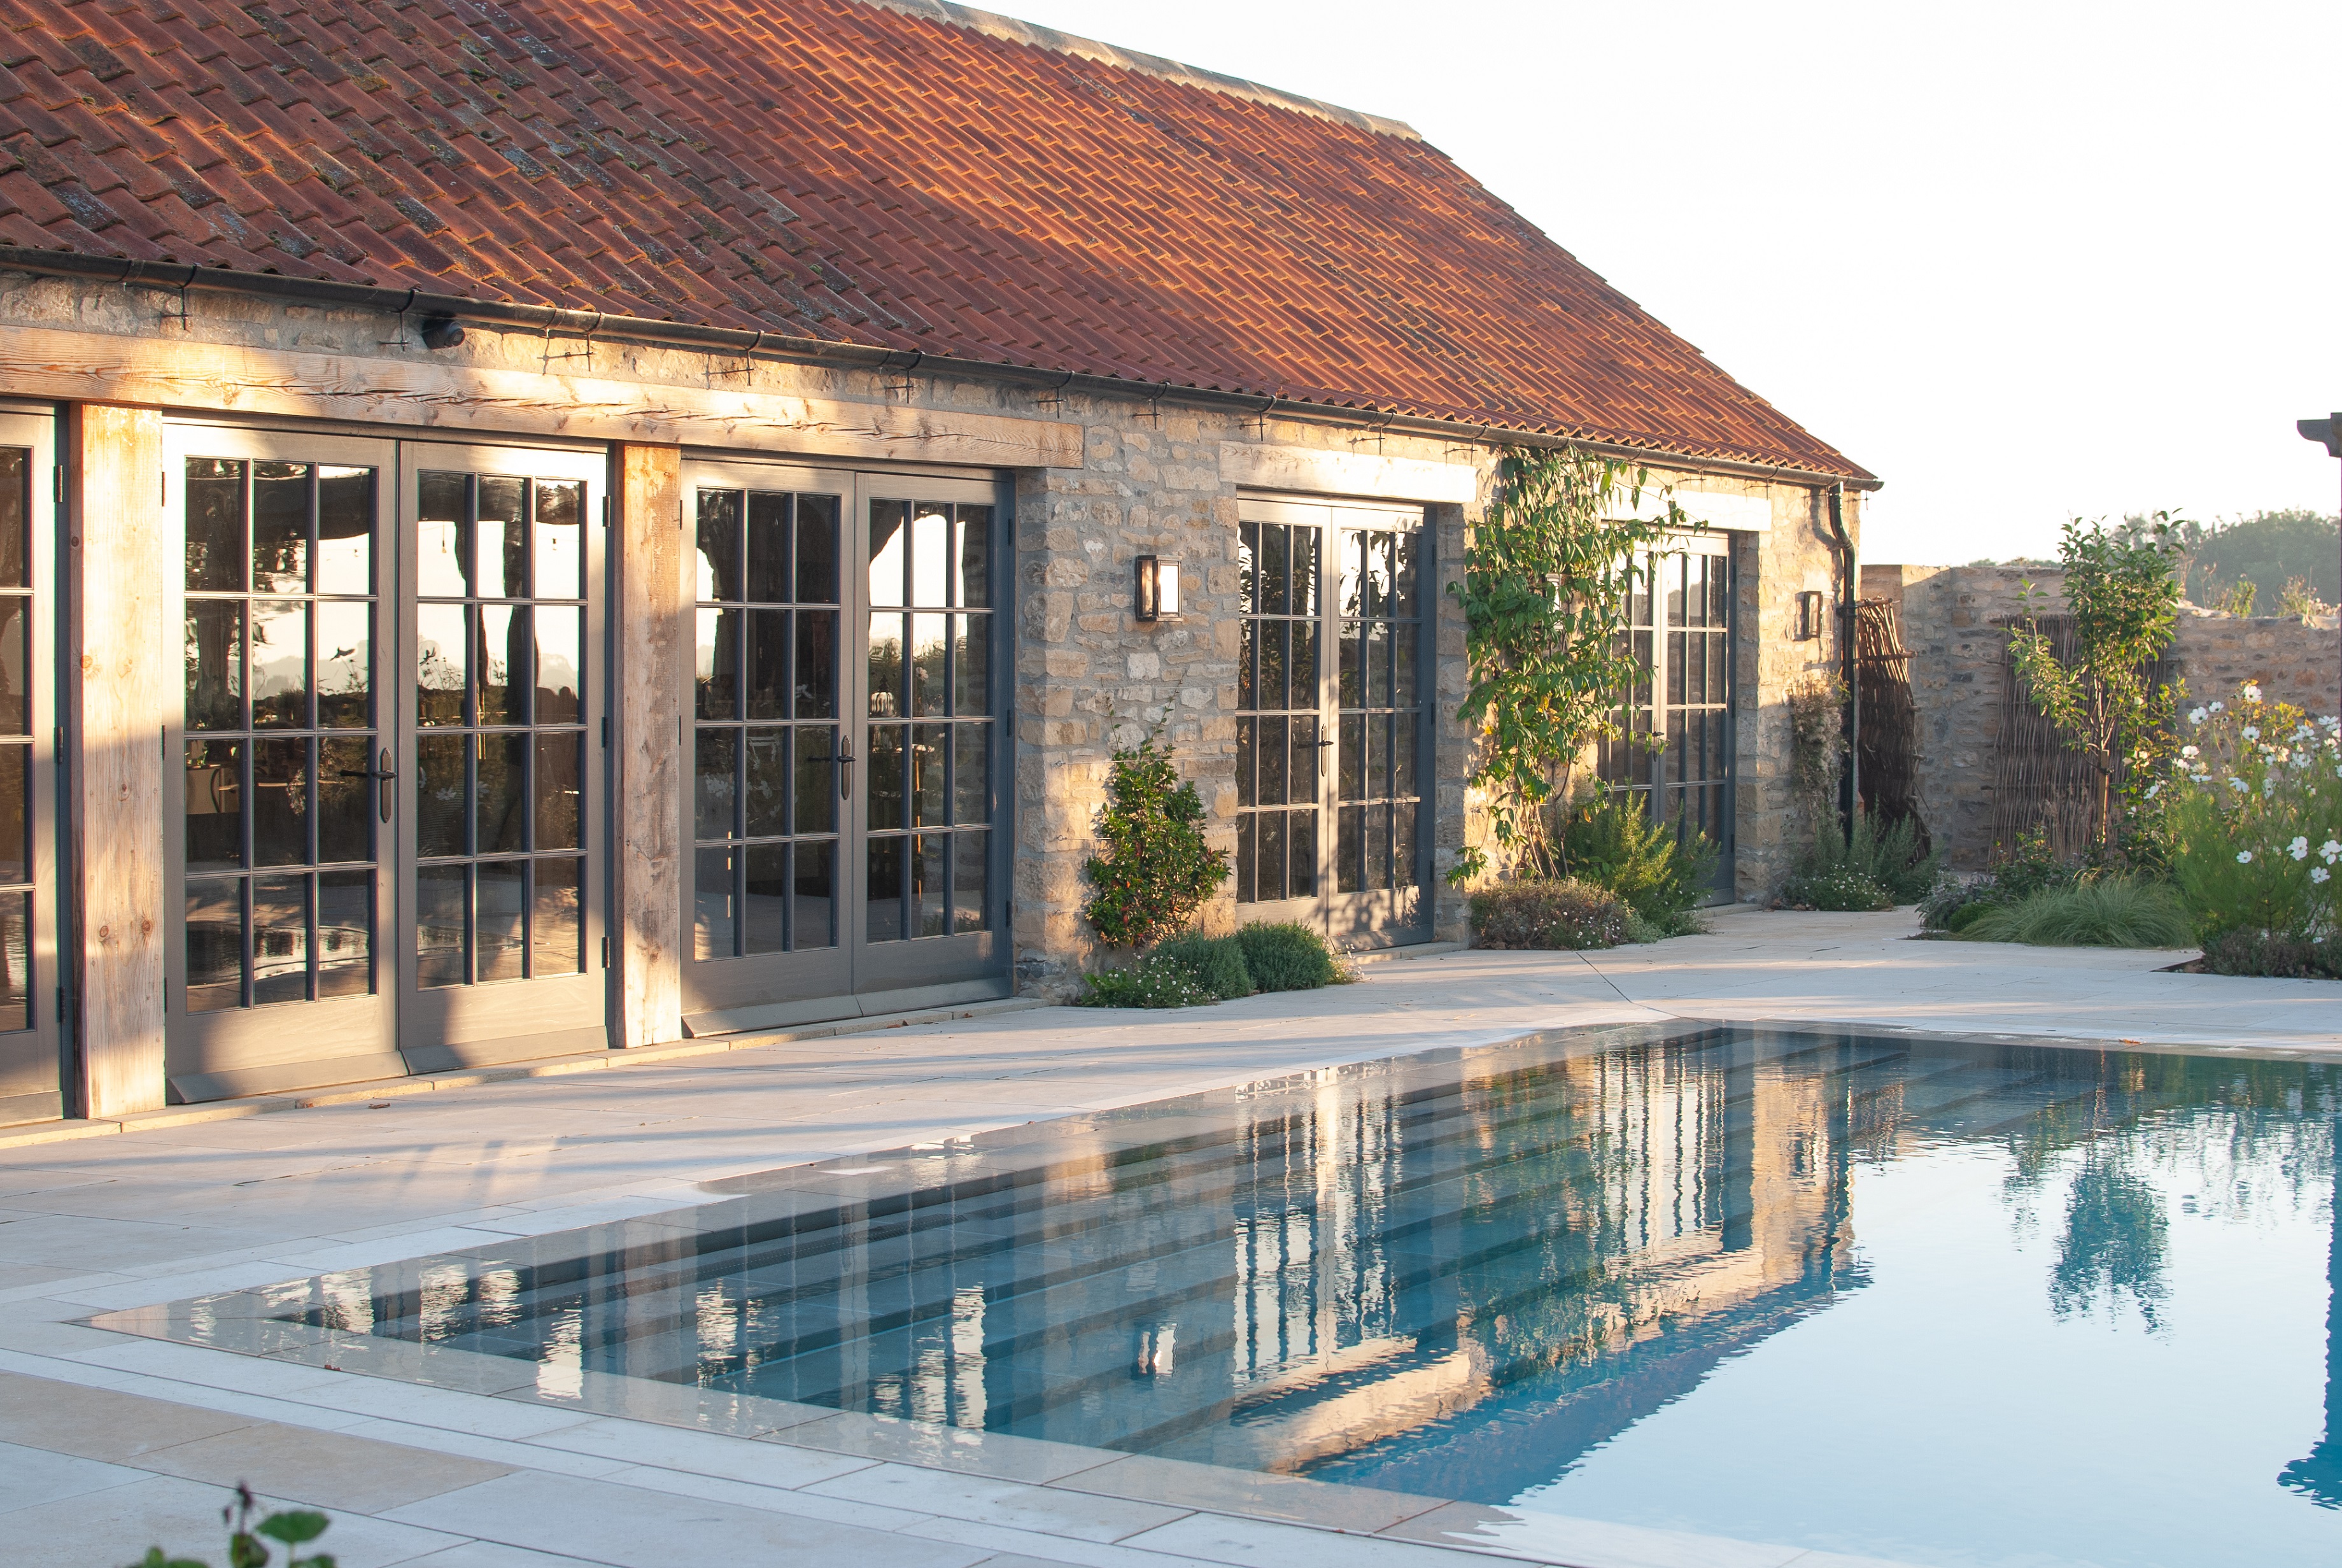 The Forest Spa at Middleton Lodge Estate Outdoor Poolhouse